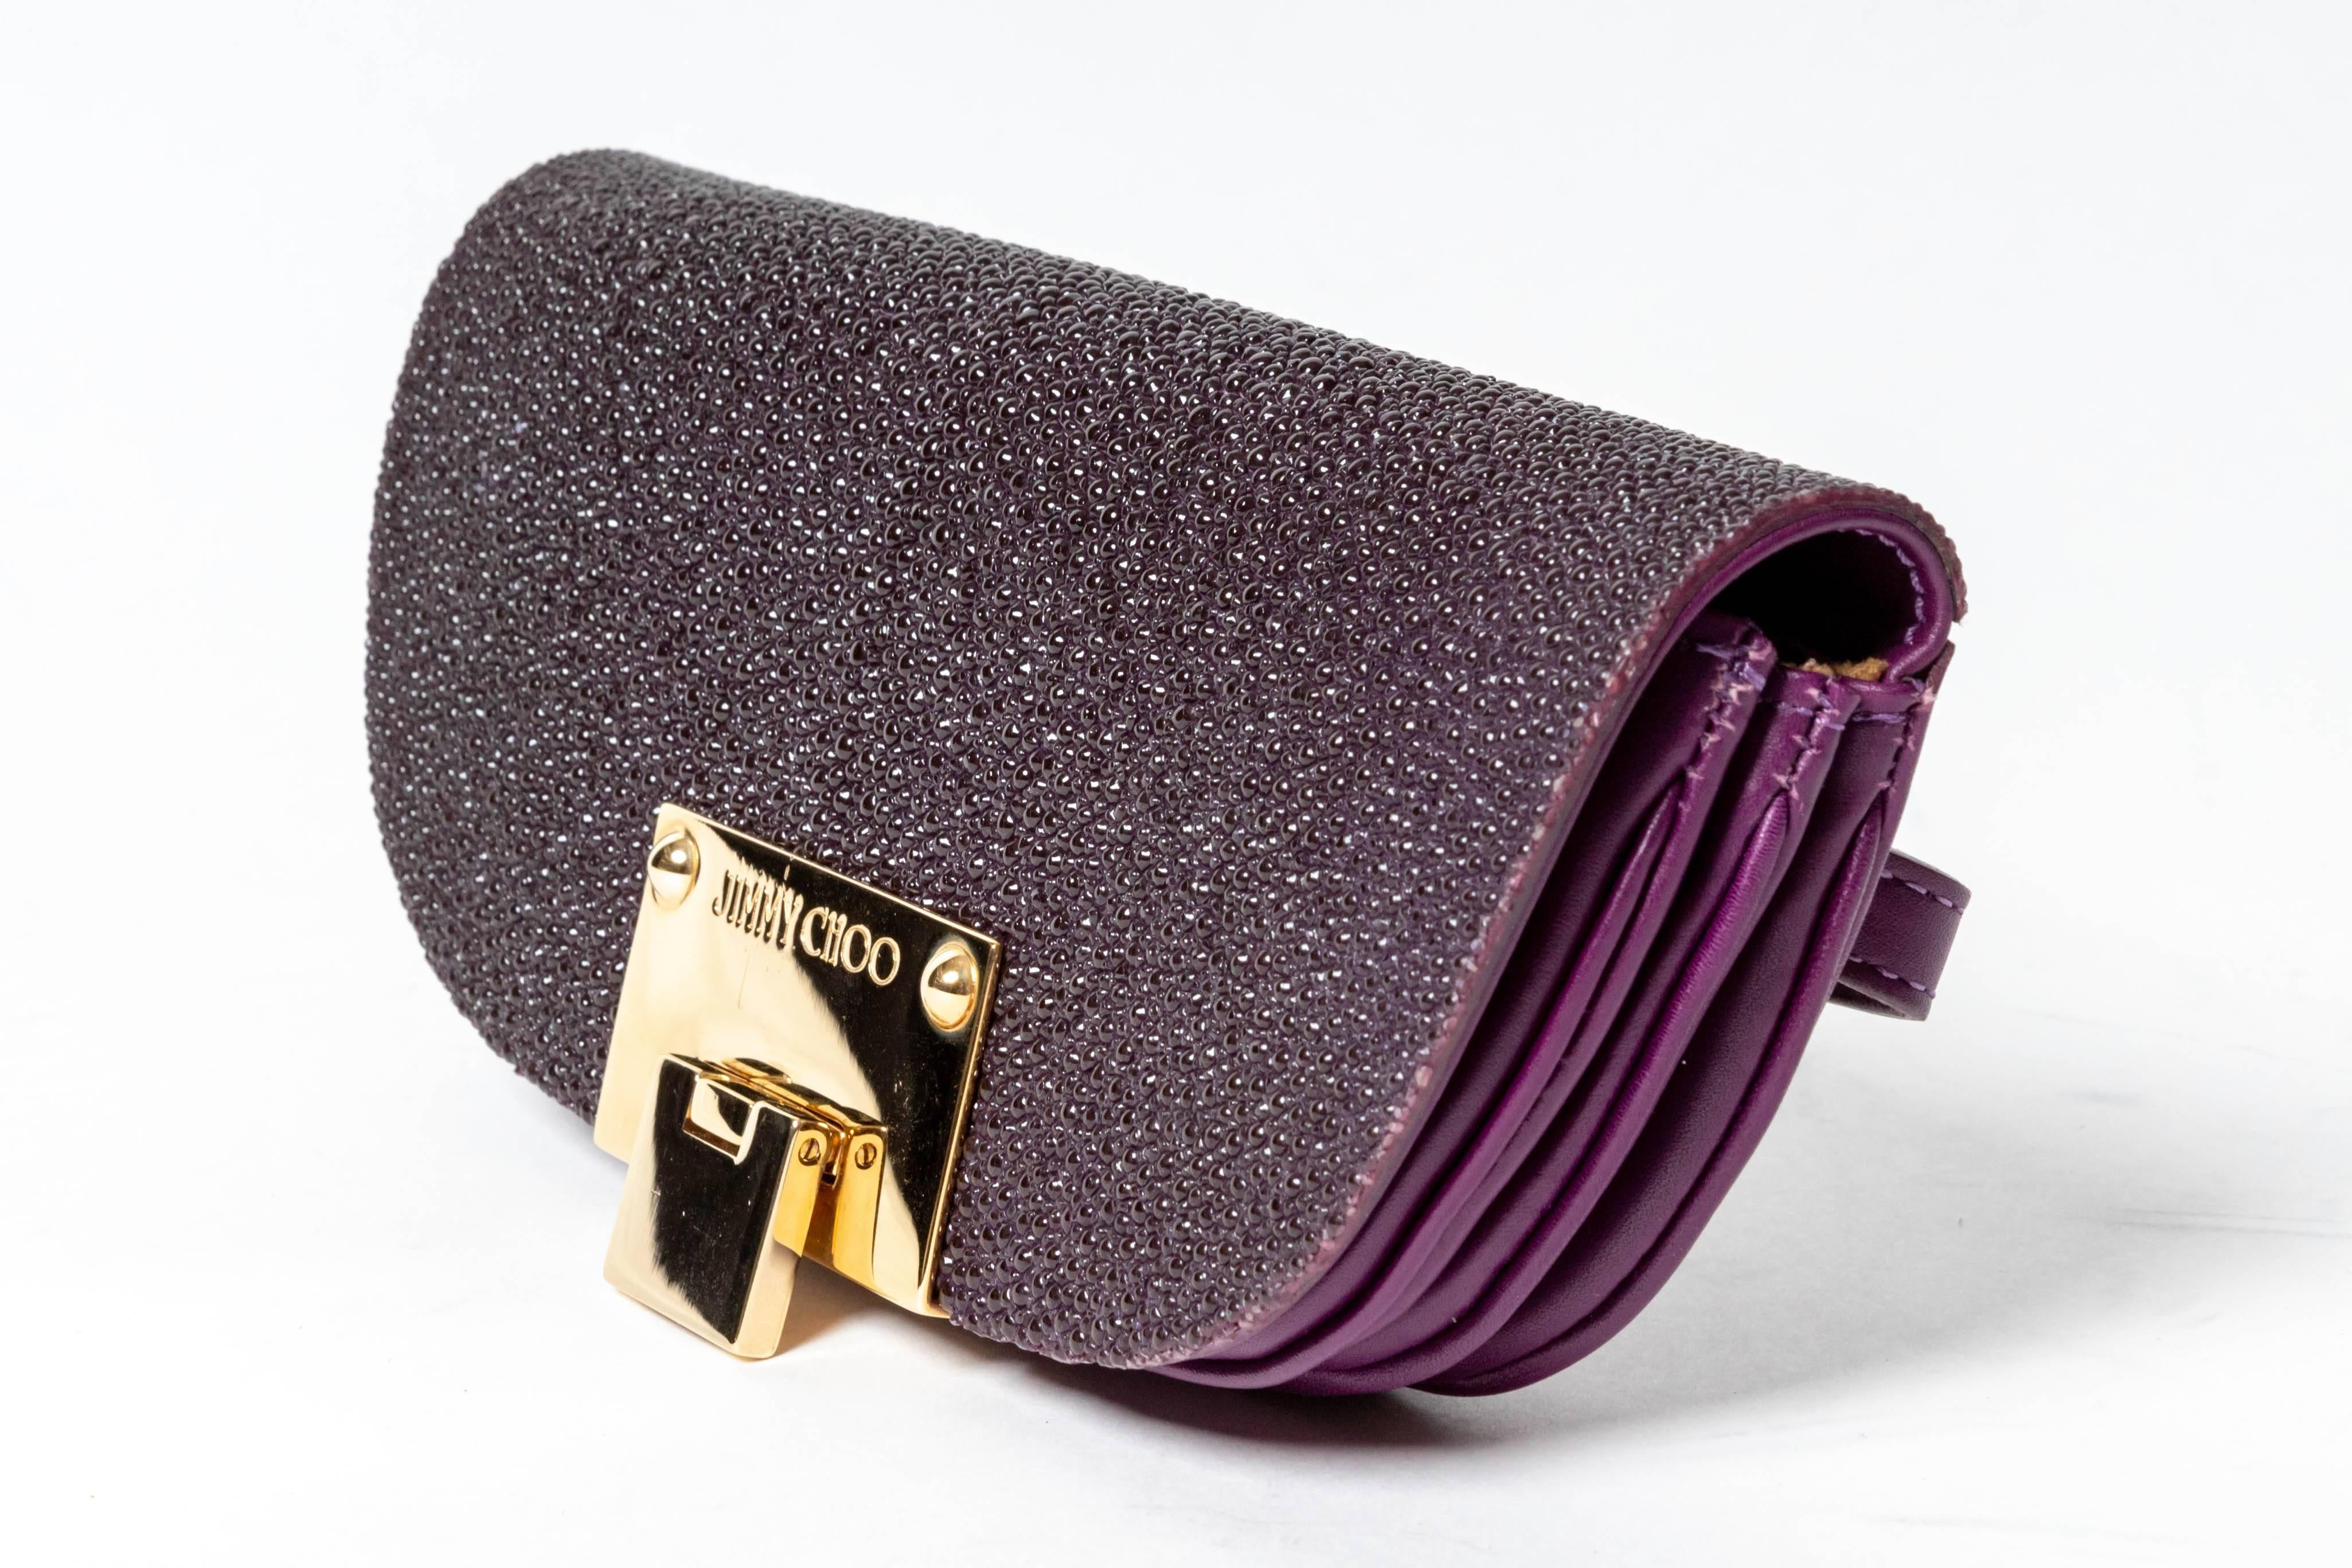 Fabulous Jimmy Choo Purple Stingray / Shagreen Clutch /  Wristlet with Gold Hardware
Suede lining
Condition is excellent
Faint scratches to hardware
